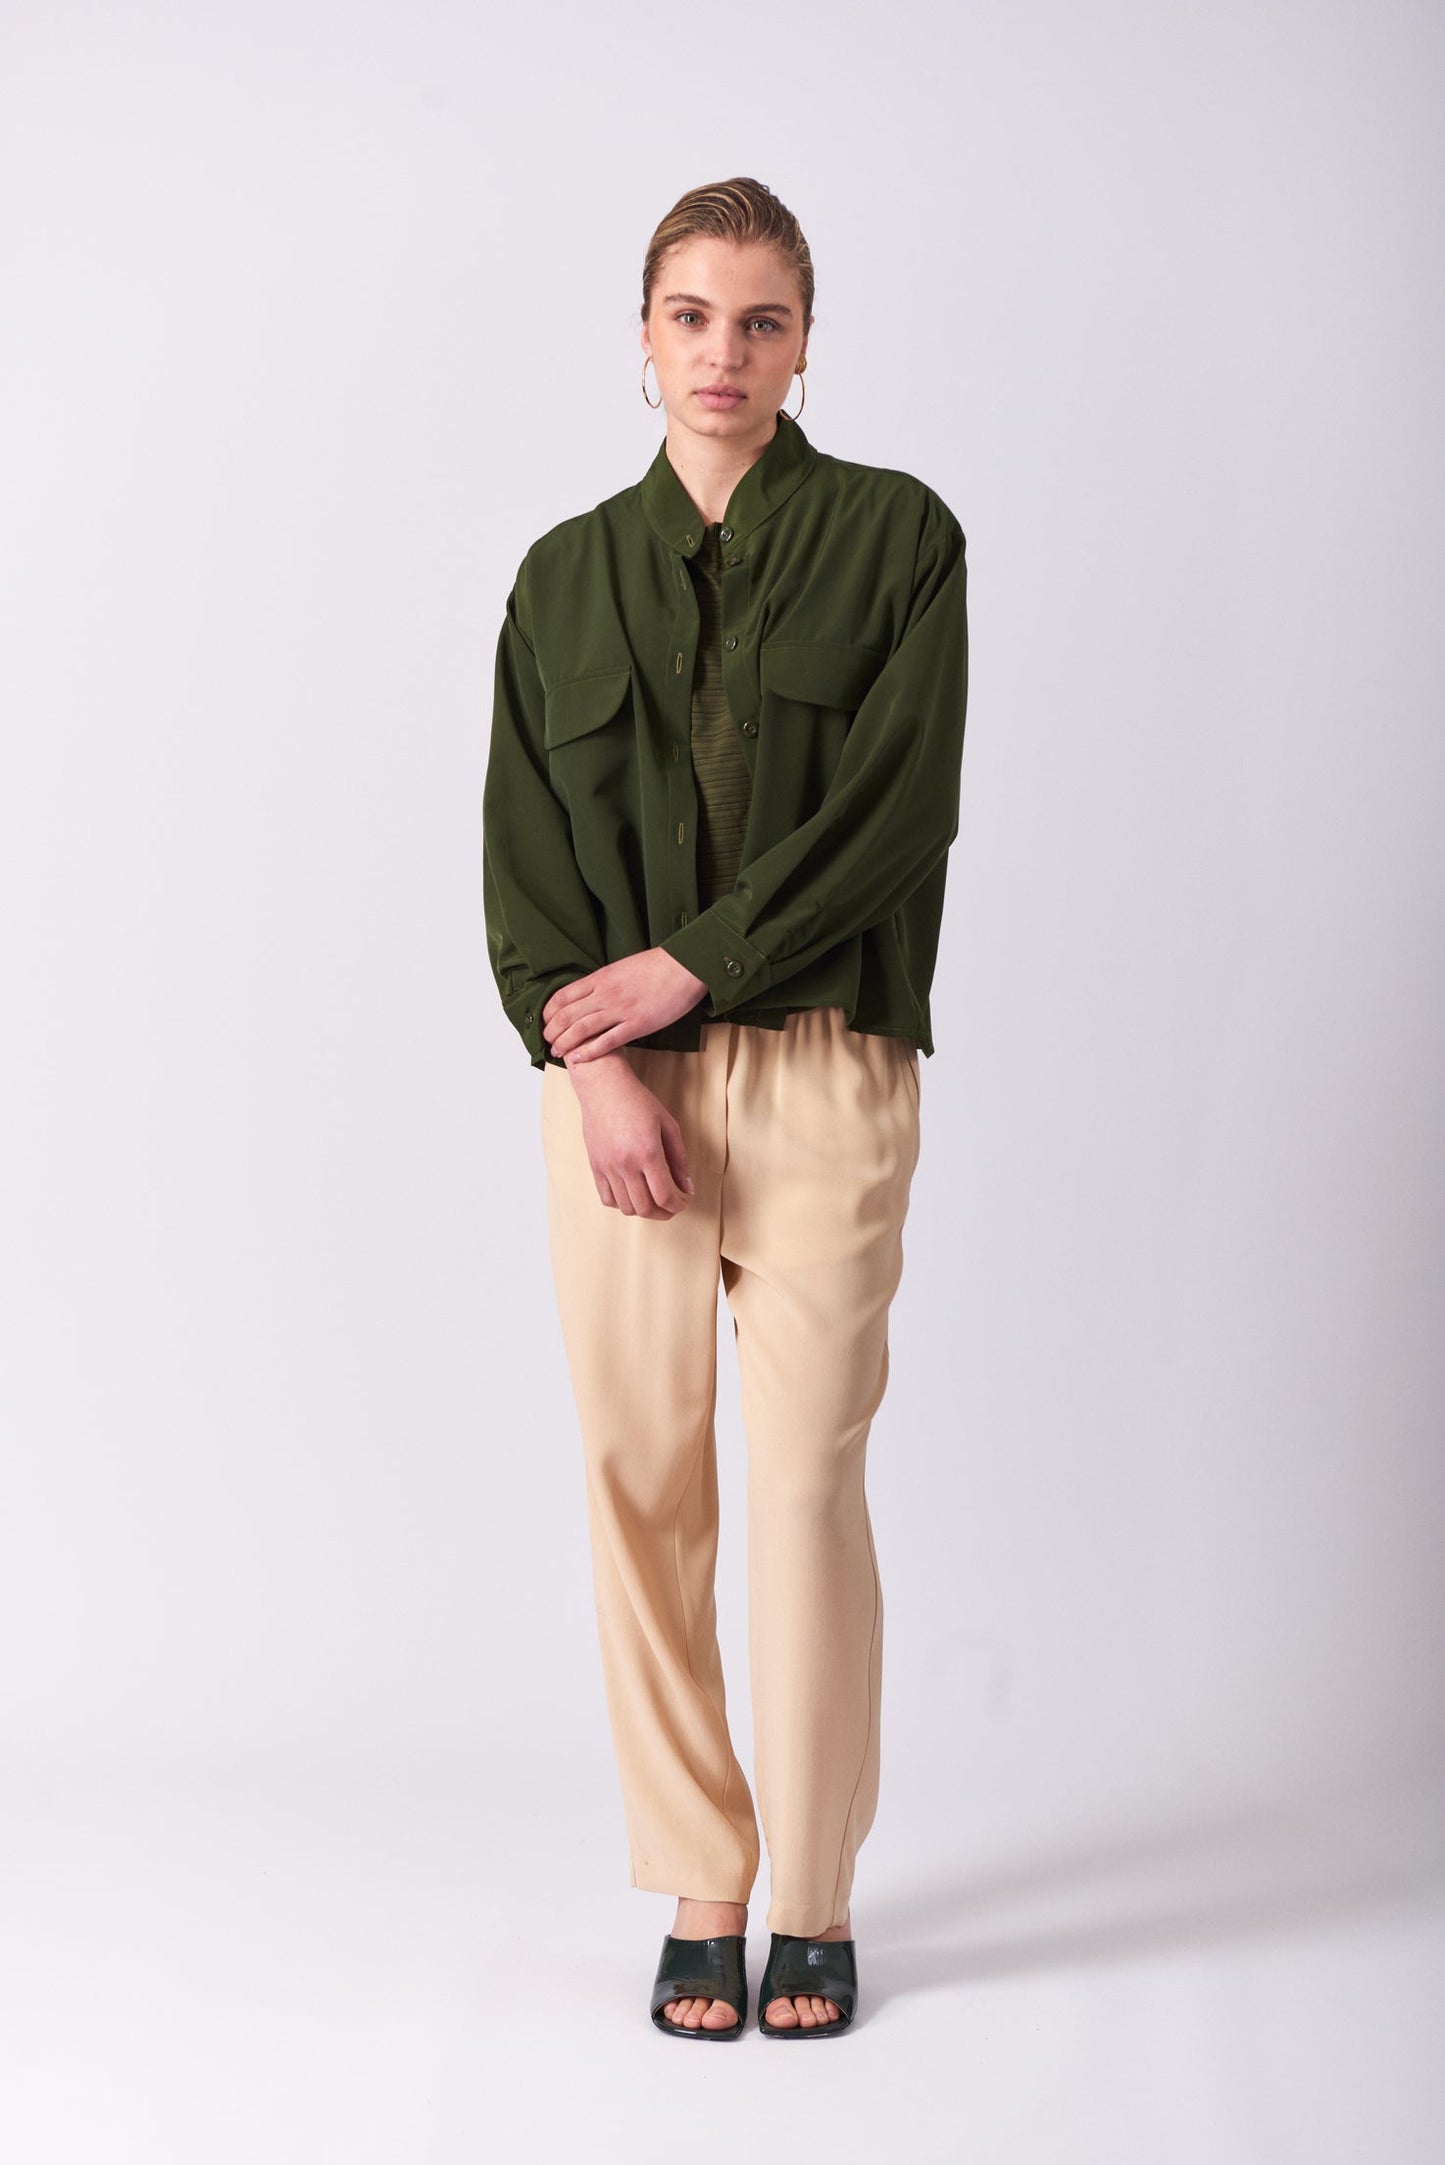 Top 12 Long Sleeved Shirt | Olive